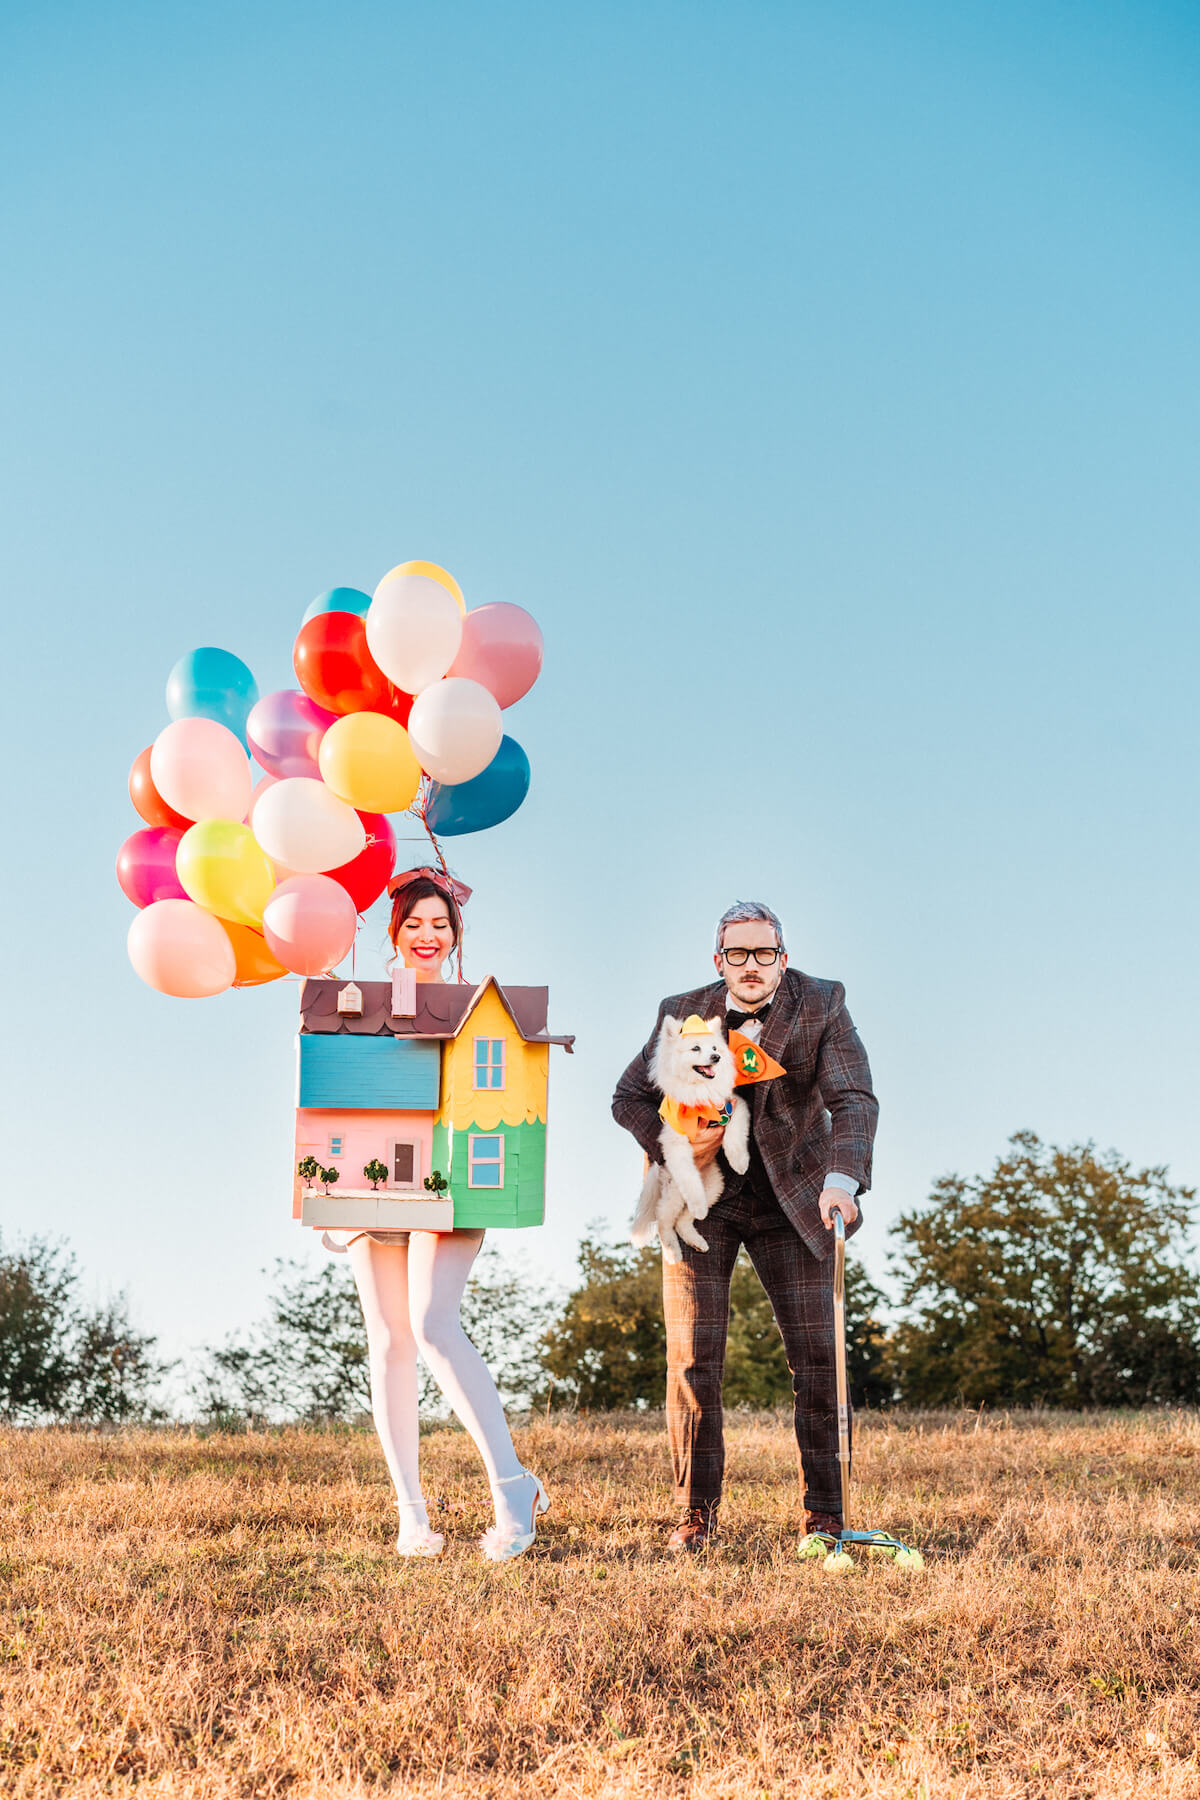 Diy pixar up halloween costume with woman dressed as house with balloons and man dressed as carl with their dog dressed as russell